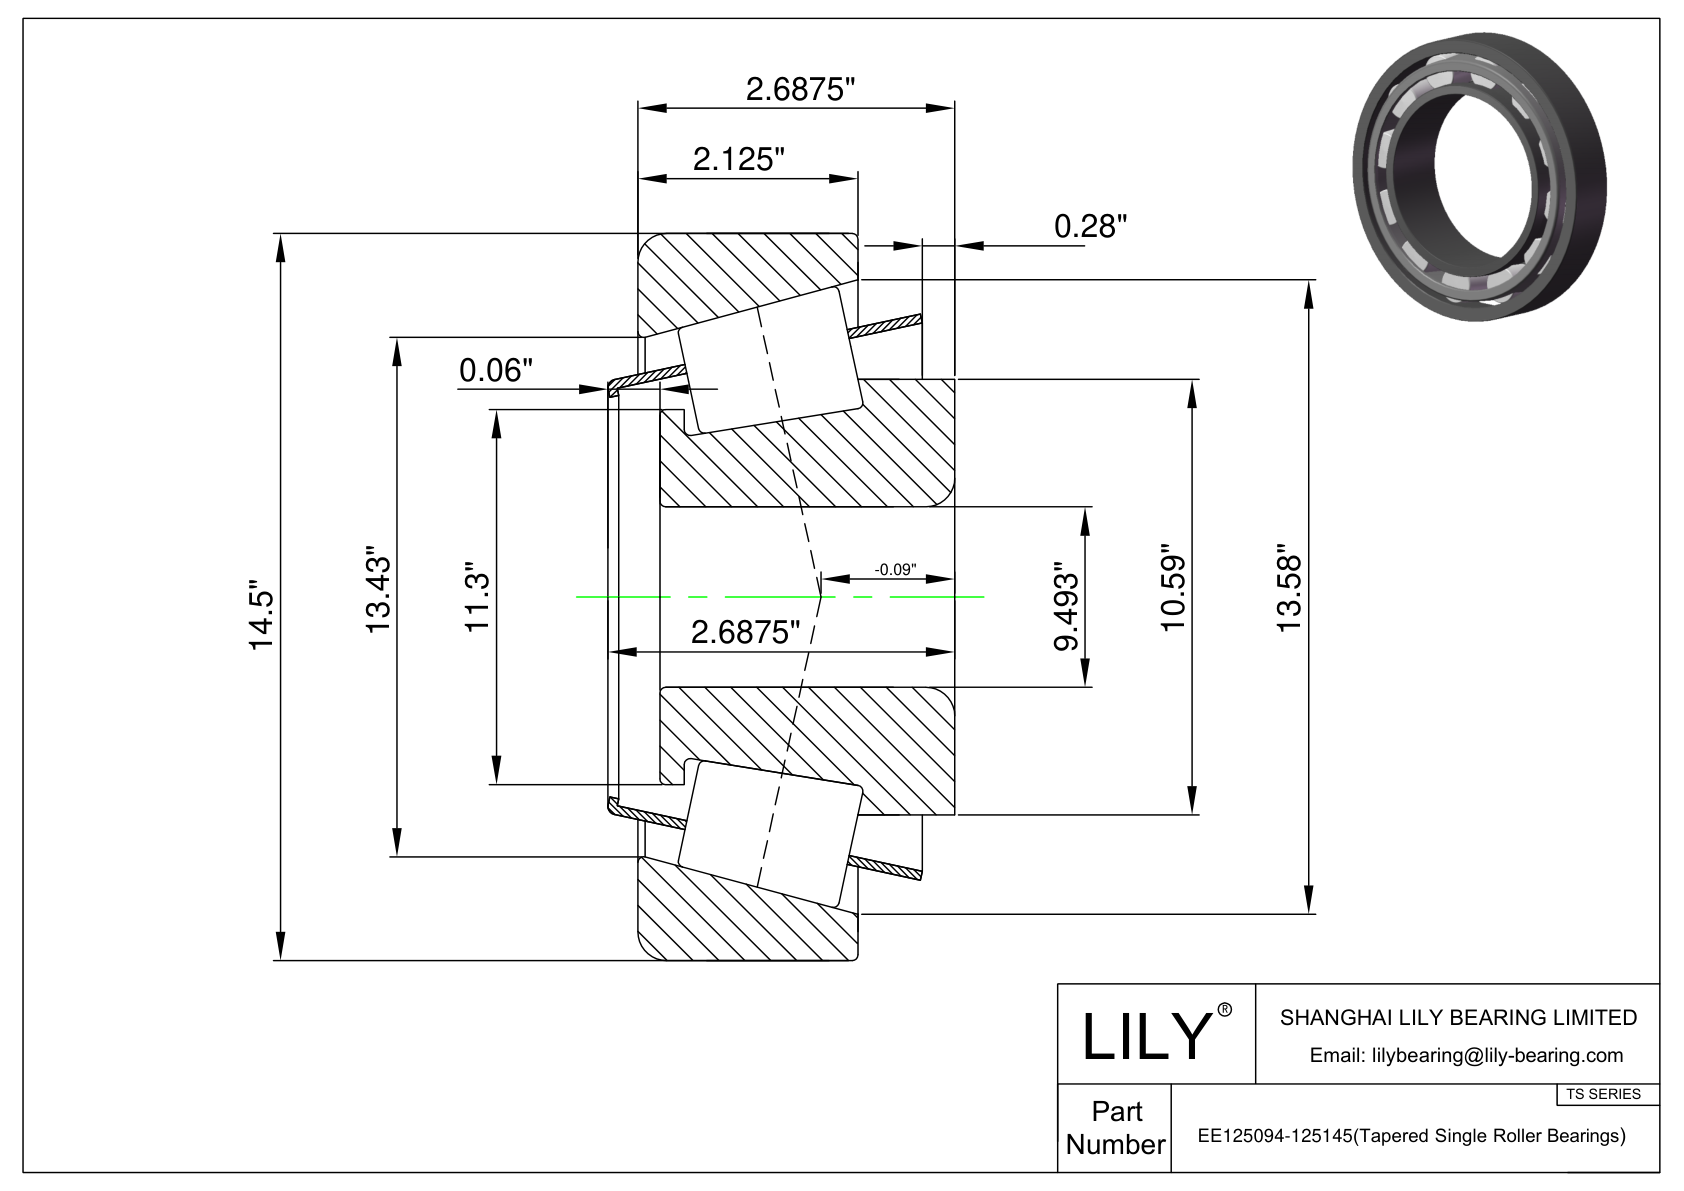 EE125094-125145 TS (Tapered Single Roller Bearings) (Imperial) cad drawing